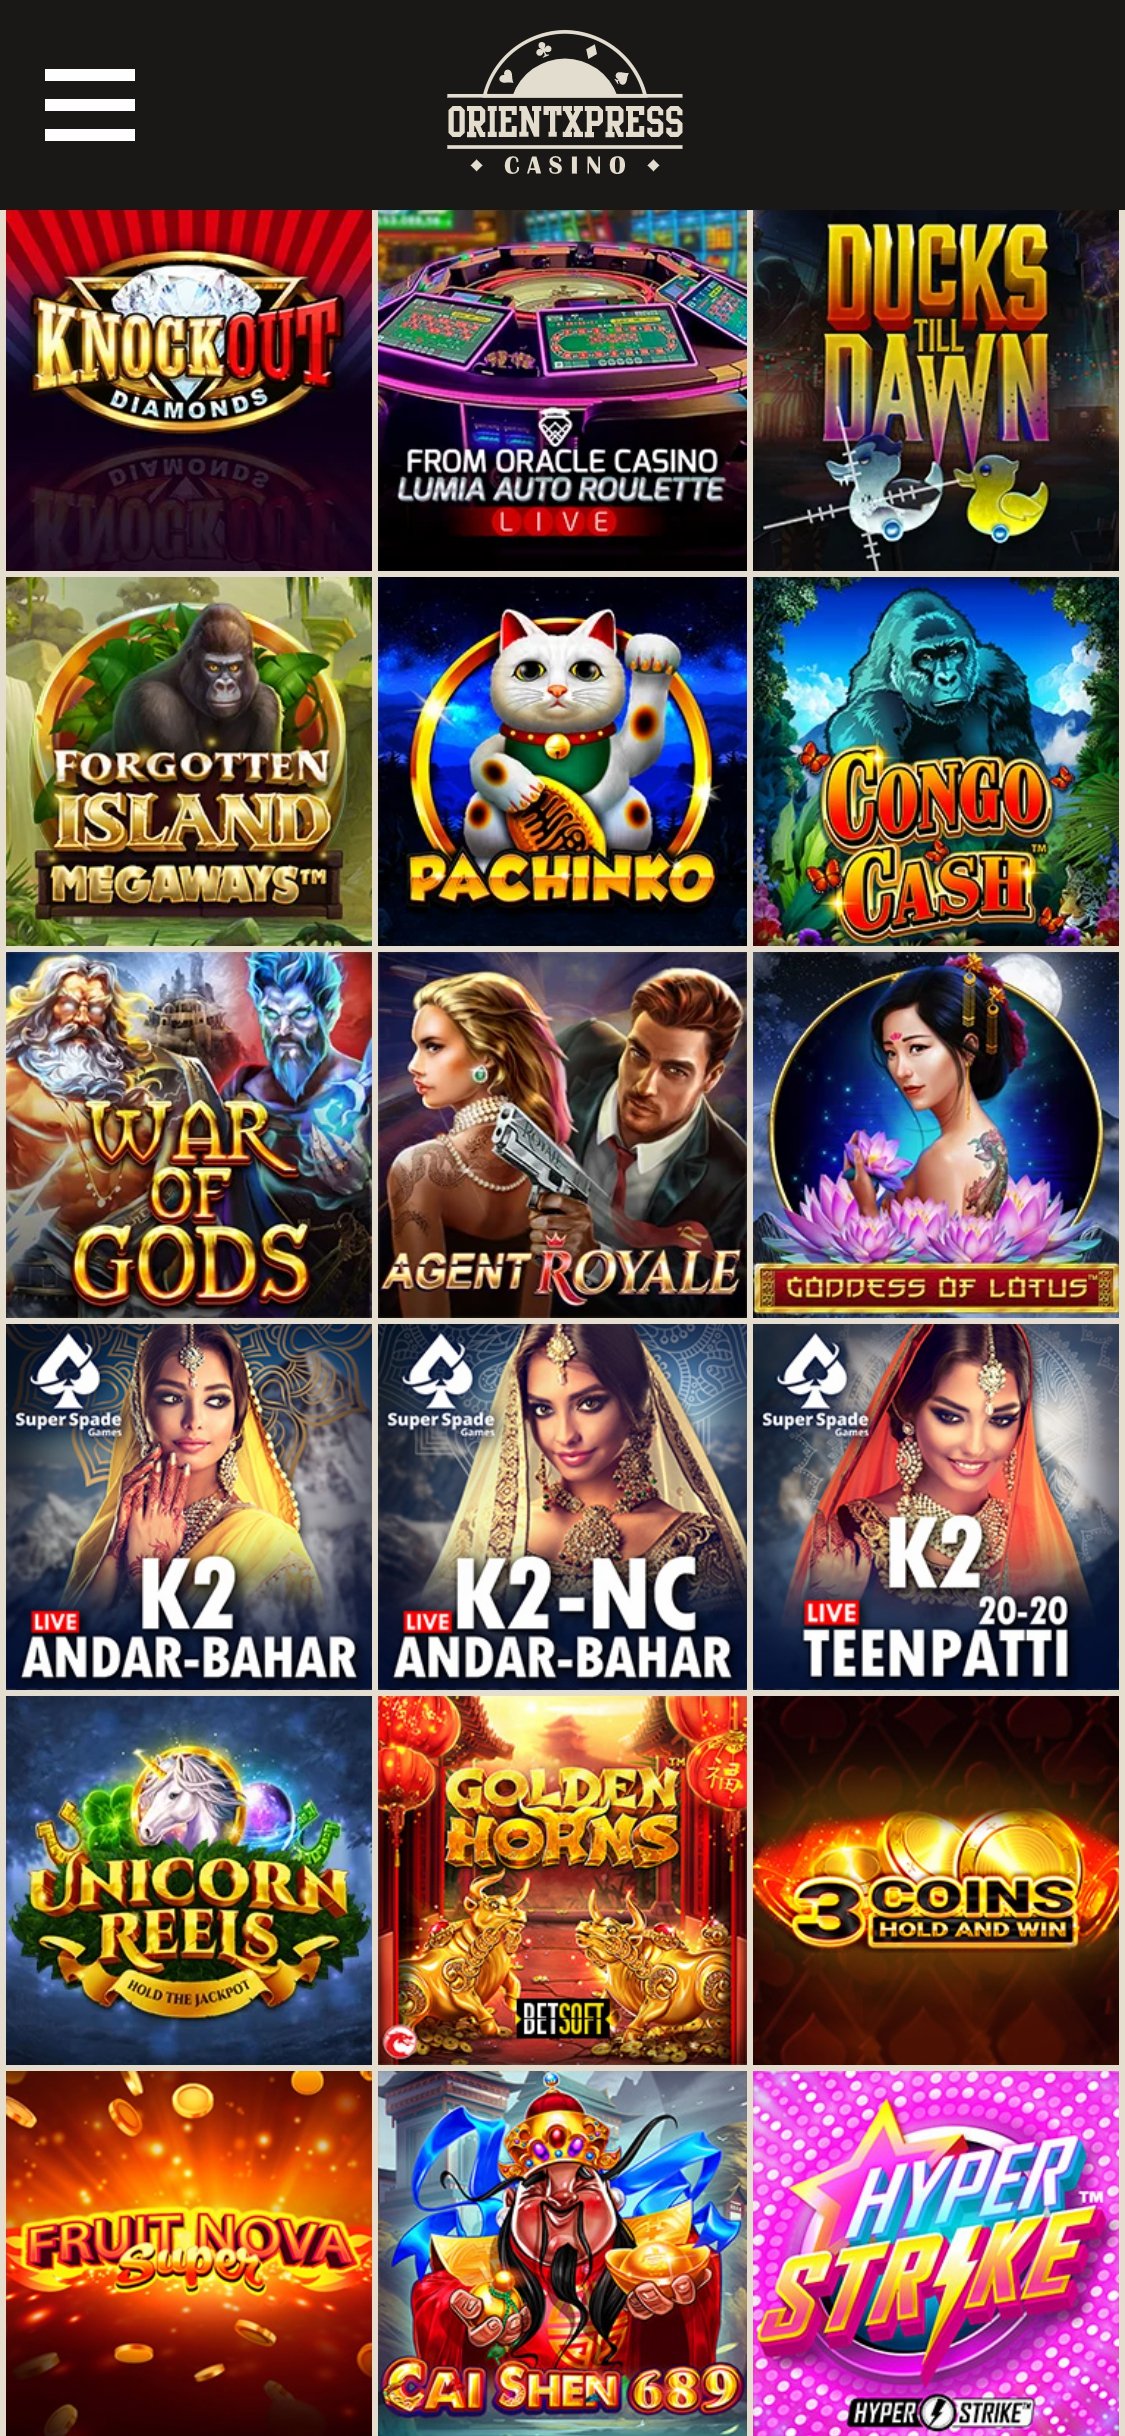 Orient Xpress Casino Mobile Games Review